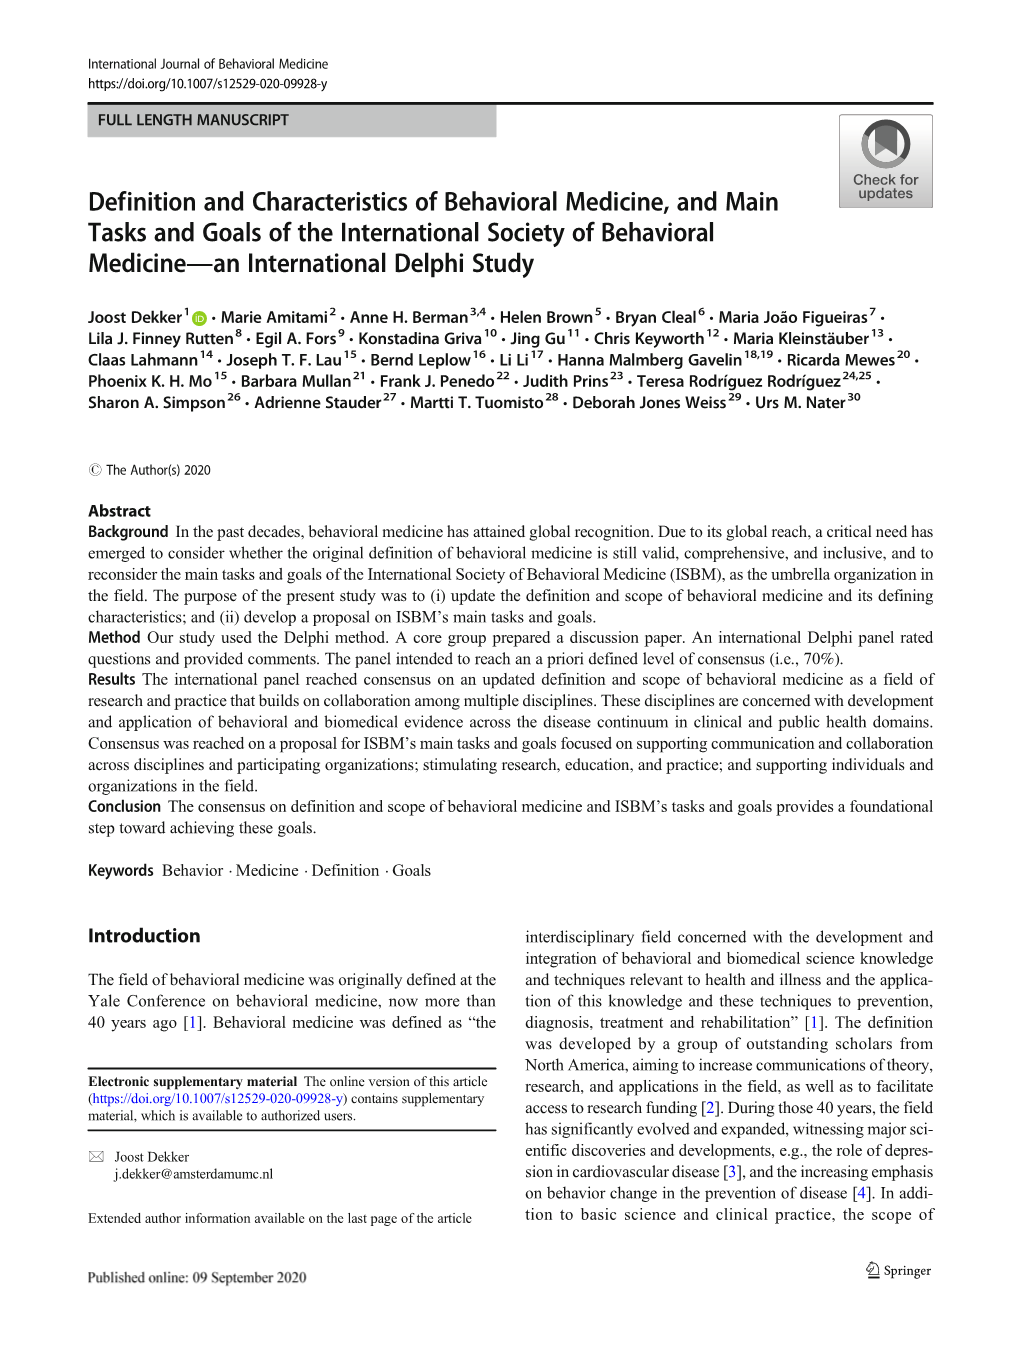 Definition and Characteristics of Behavioral Medicine, and Main Tasks and Goals of the International Society of Behavioral Medicine—An International Delphi Study